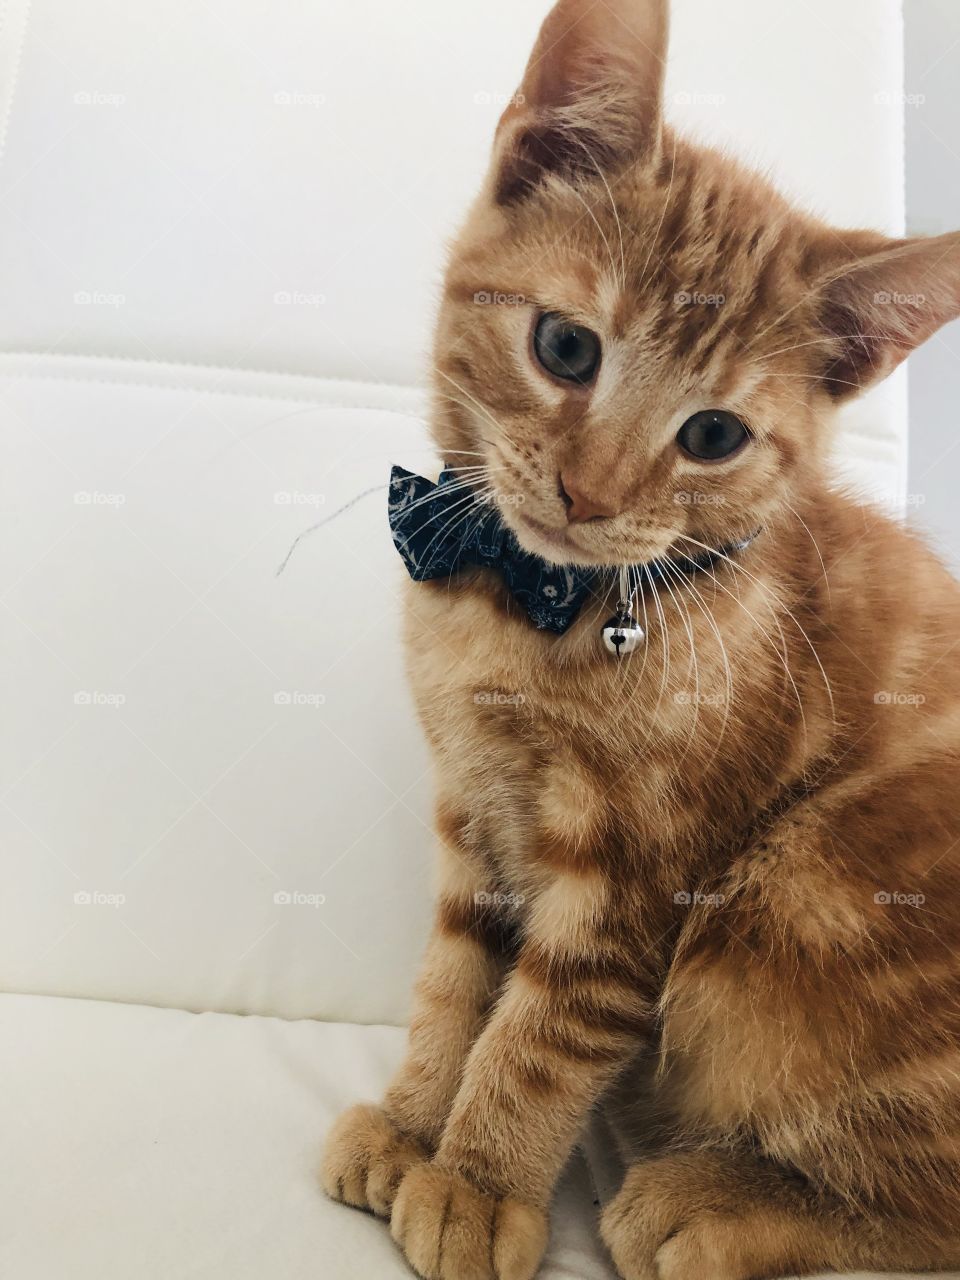 a little cat with a bow tie